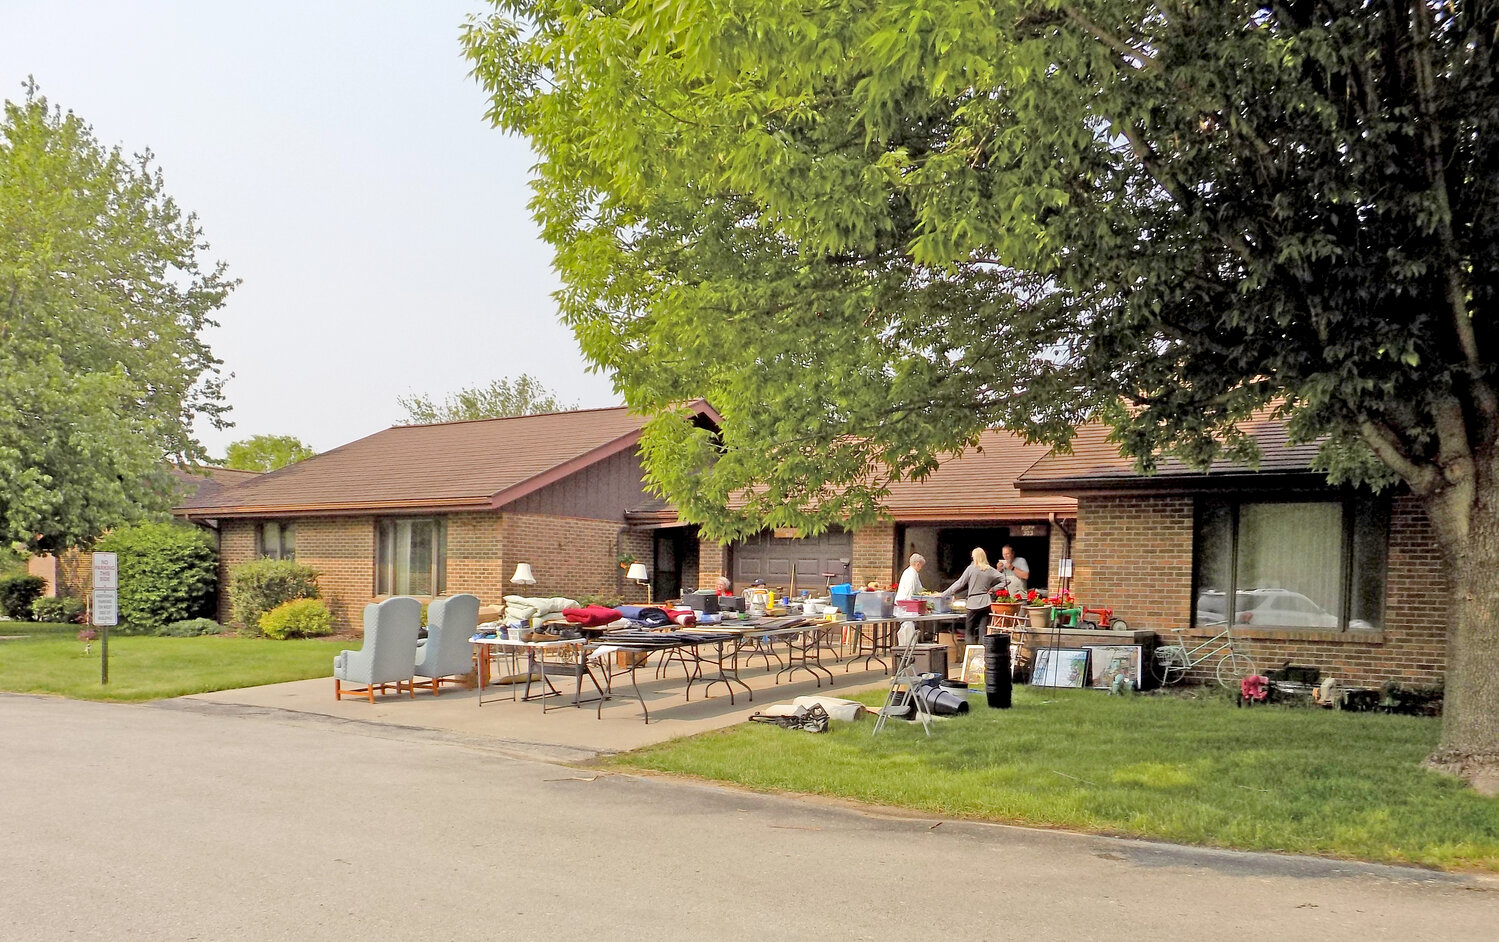 The garage sales at Pleasantview’s cottages were just a few of those going on as all of Kalona was invited to participate in the citywide garage sale weekend.